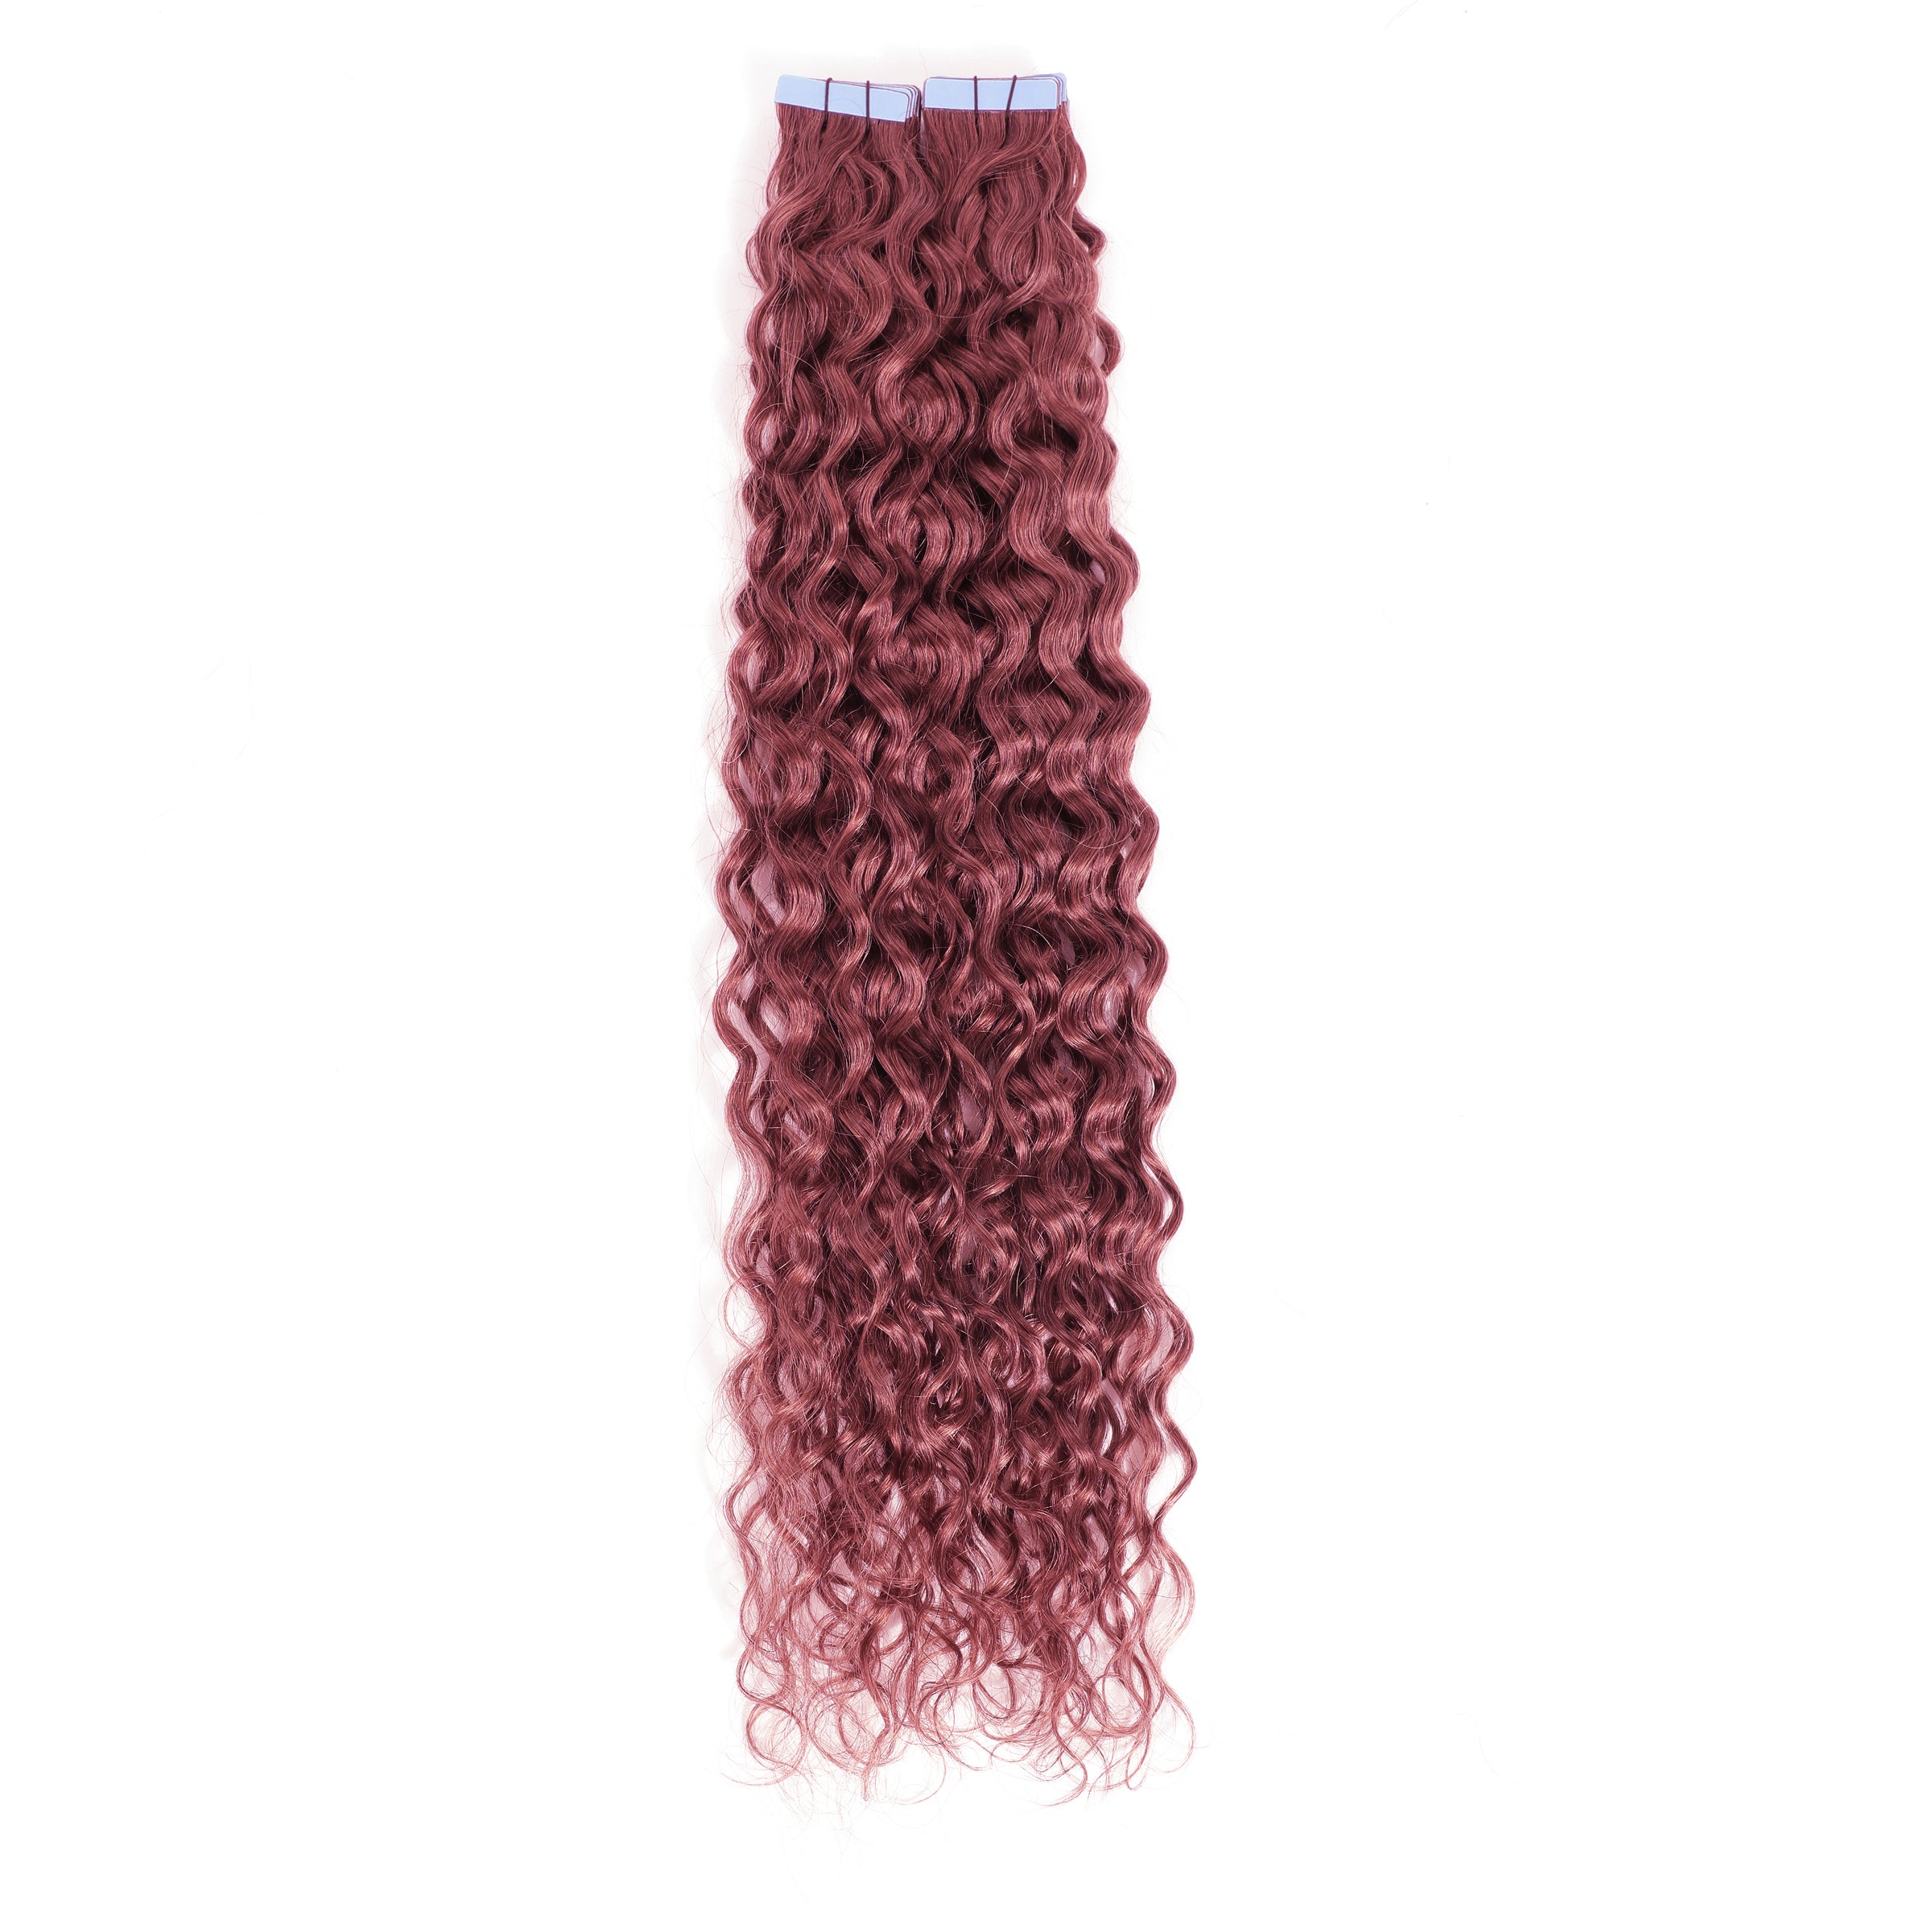 Curly Tape Hair Extensions 3B #33 Natural Red